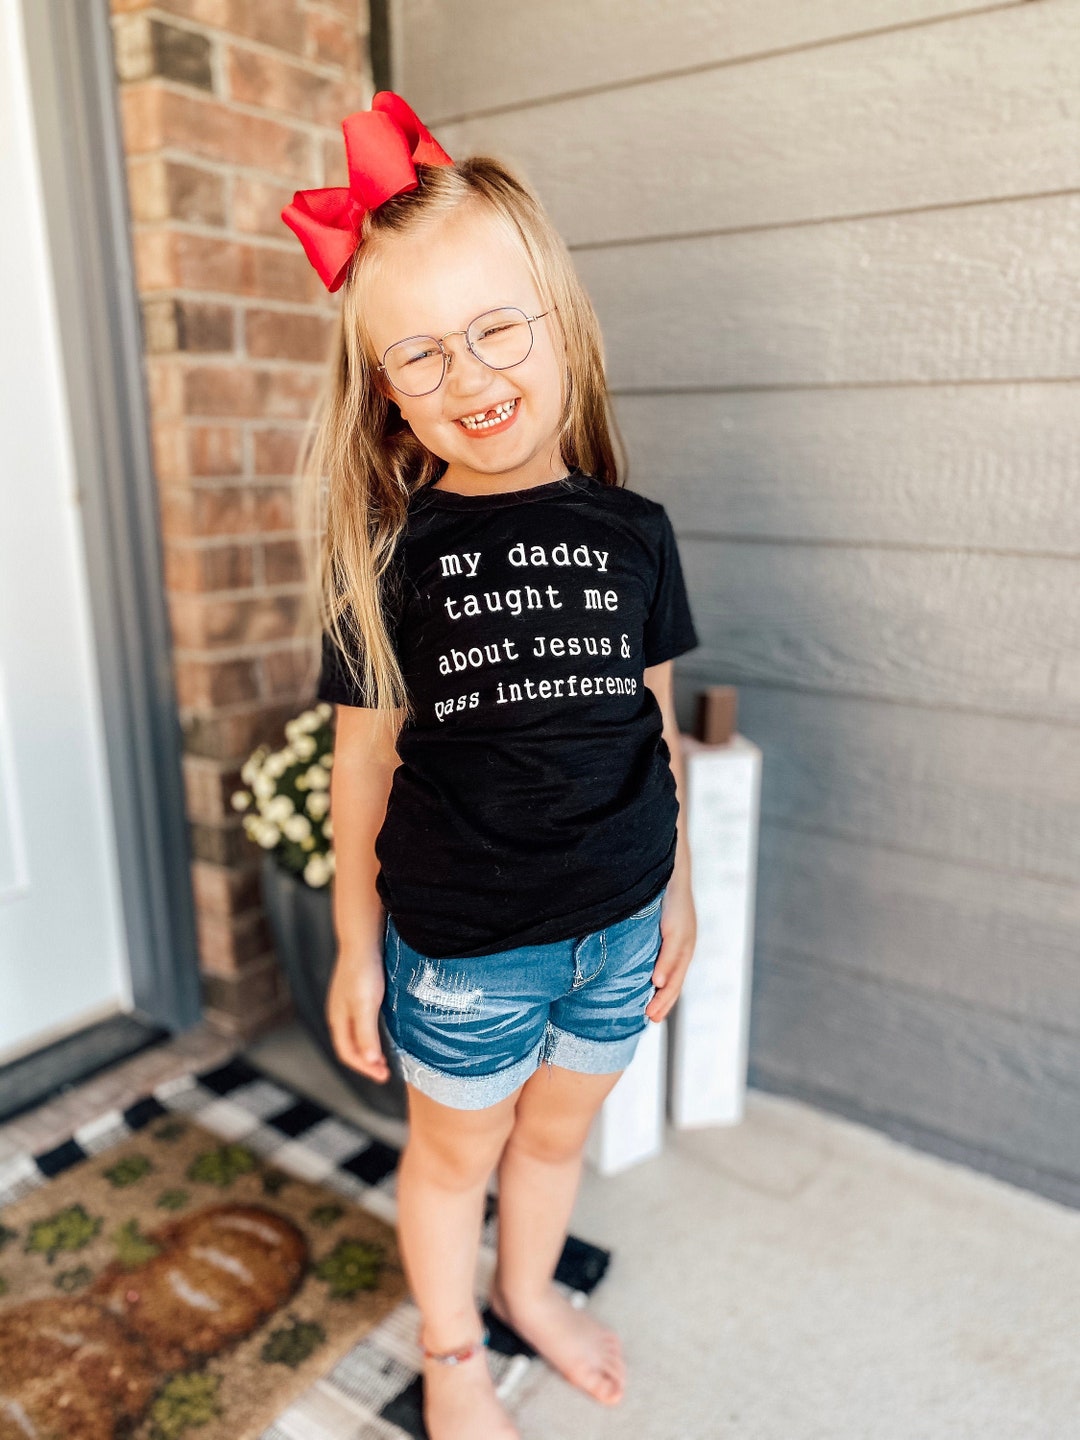 My Daddy Taught Me About Jesus and Pass Interference Shirt - Etsy